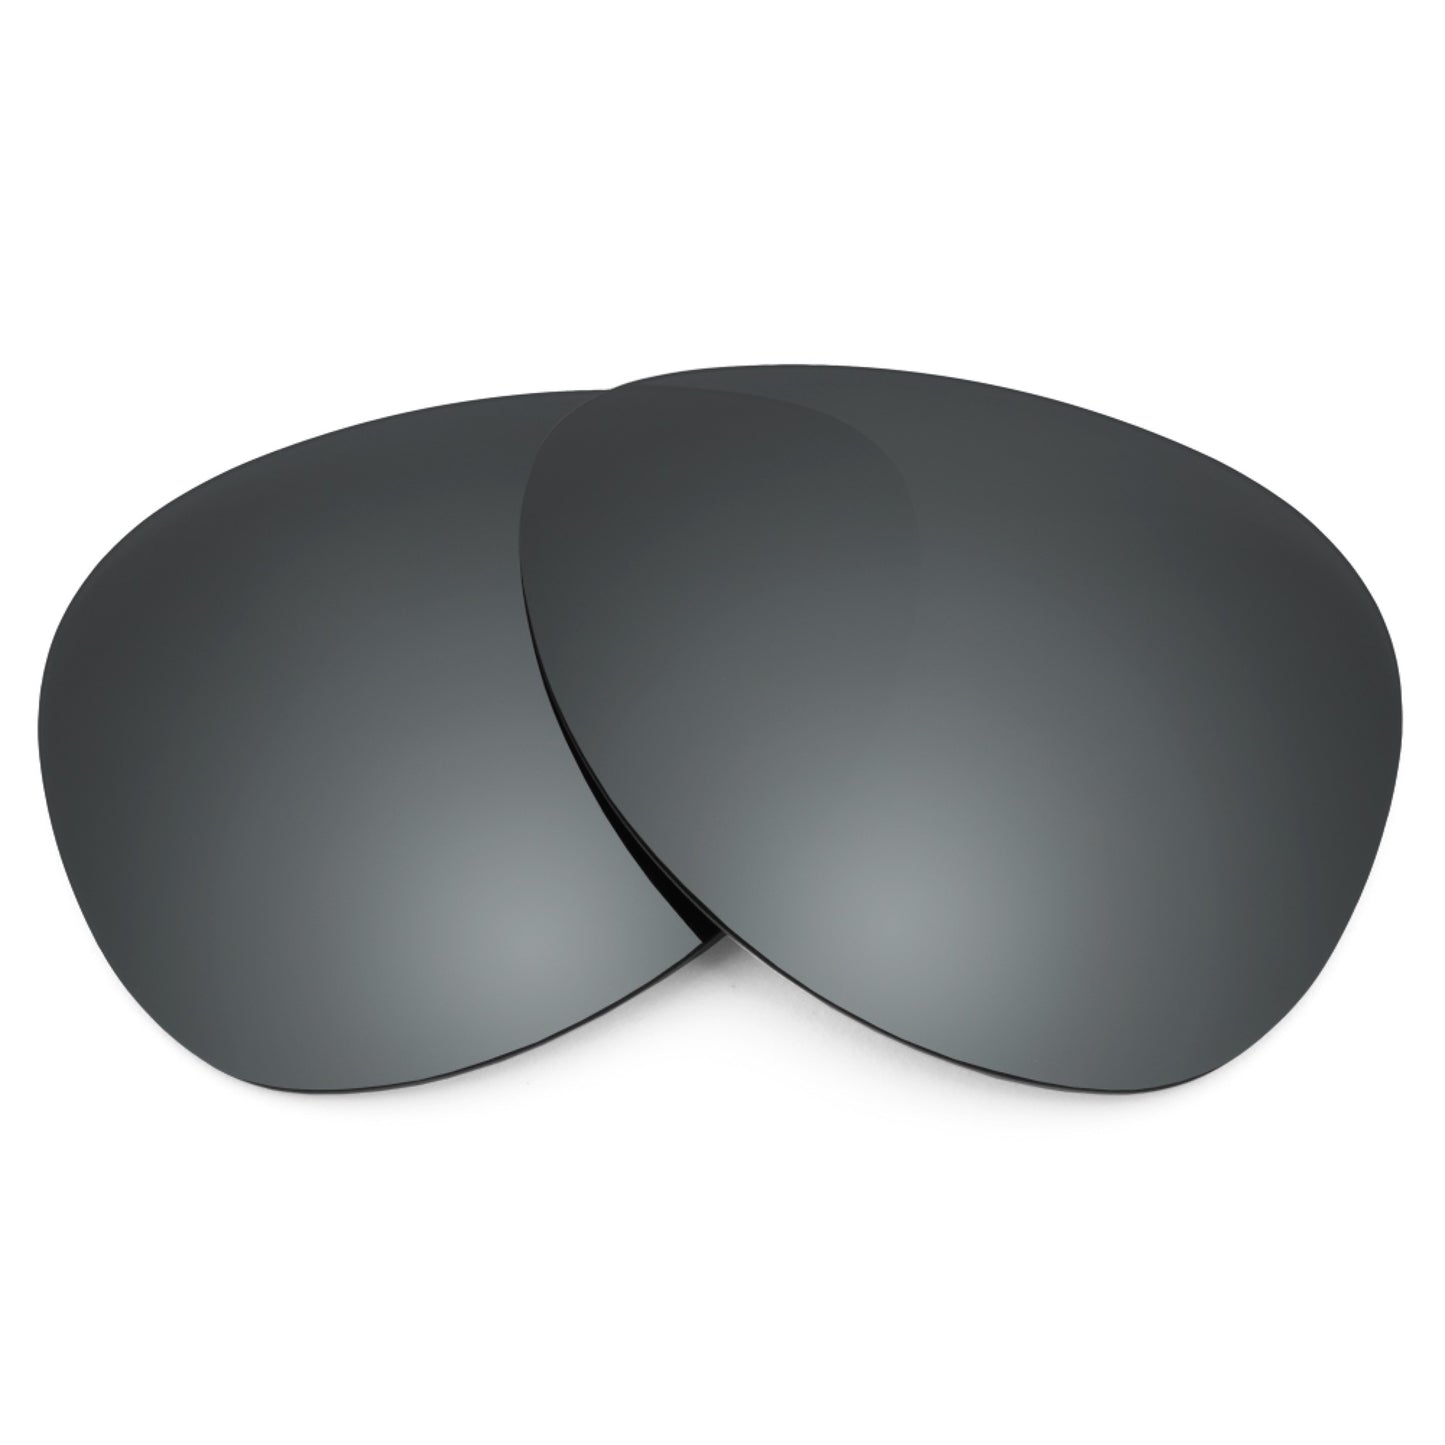 Revant replacement lenses for Ray-Ban Jackie Ohh RB4101 58mm Non-Polarized Black Chrome